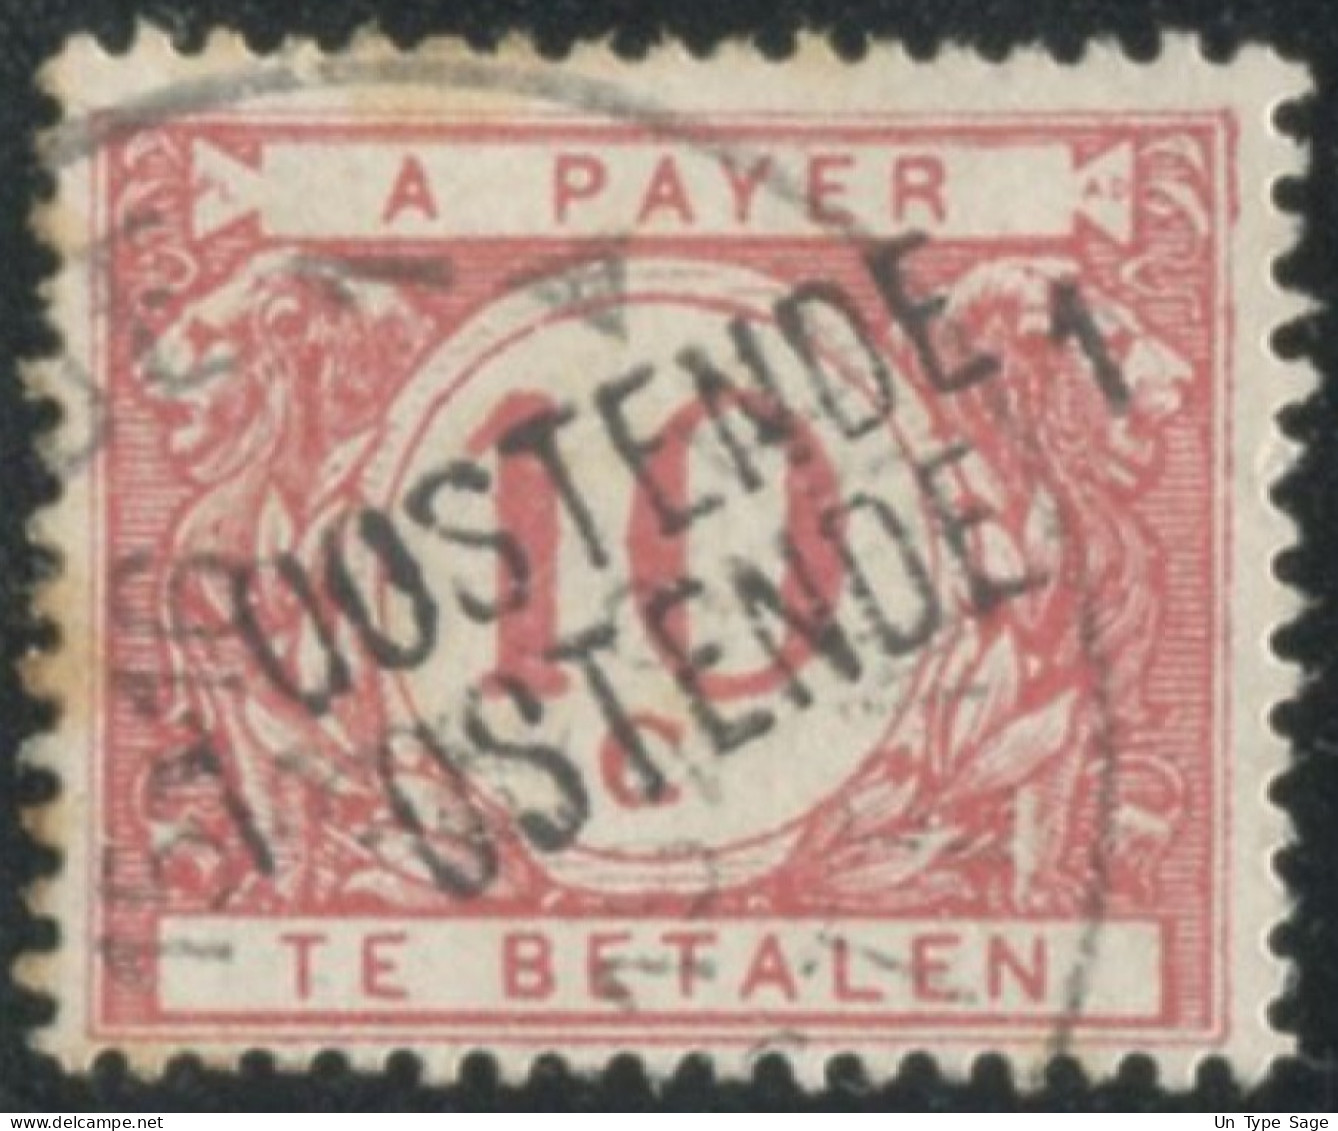 Belgique Timbre-taxe (TX) - Surcharge Locale De Distributeur - OOSTENDE / OSTENDE 1 - (F990) - Stamps